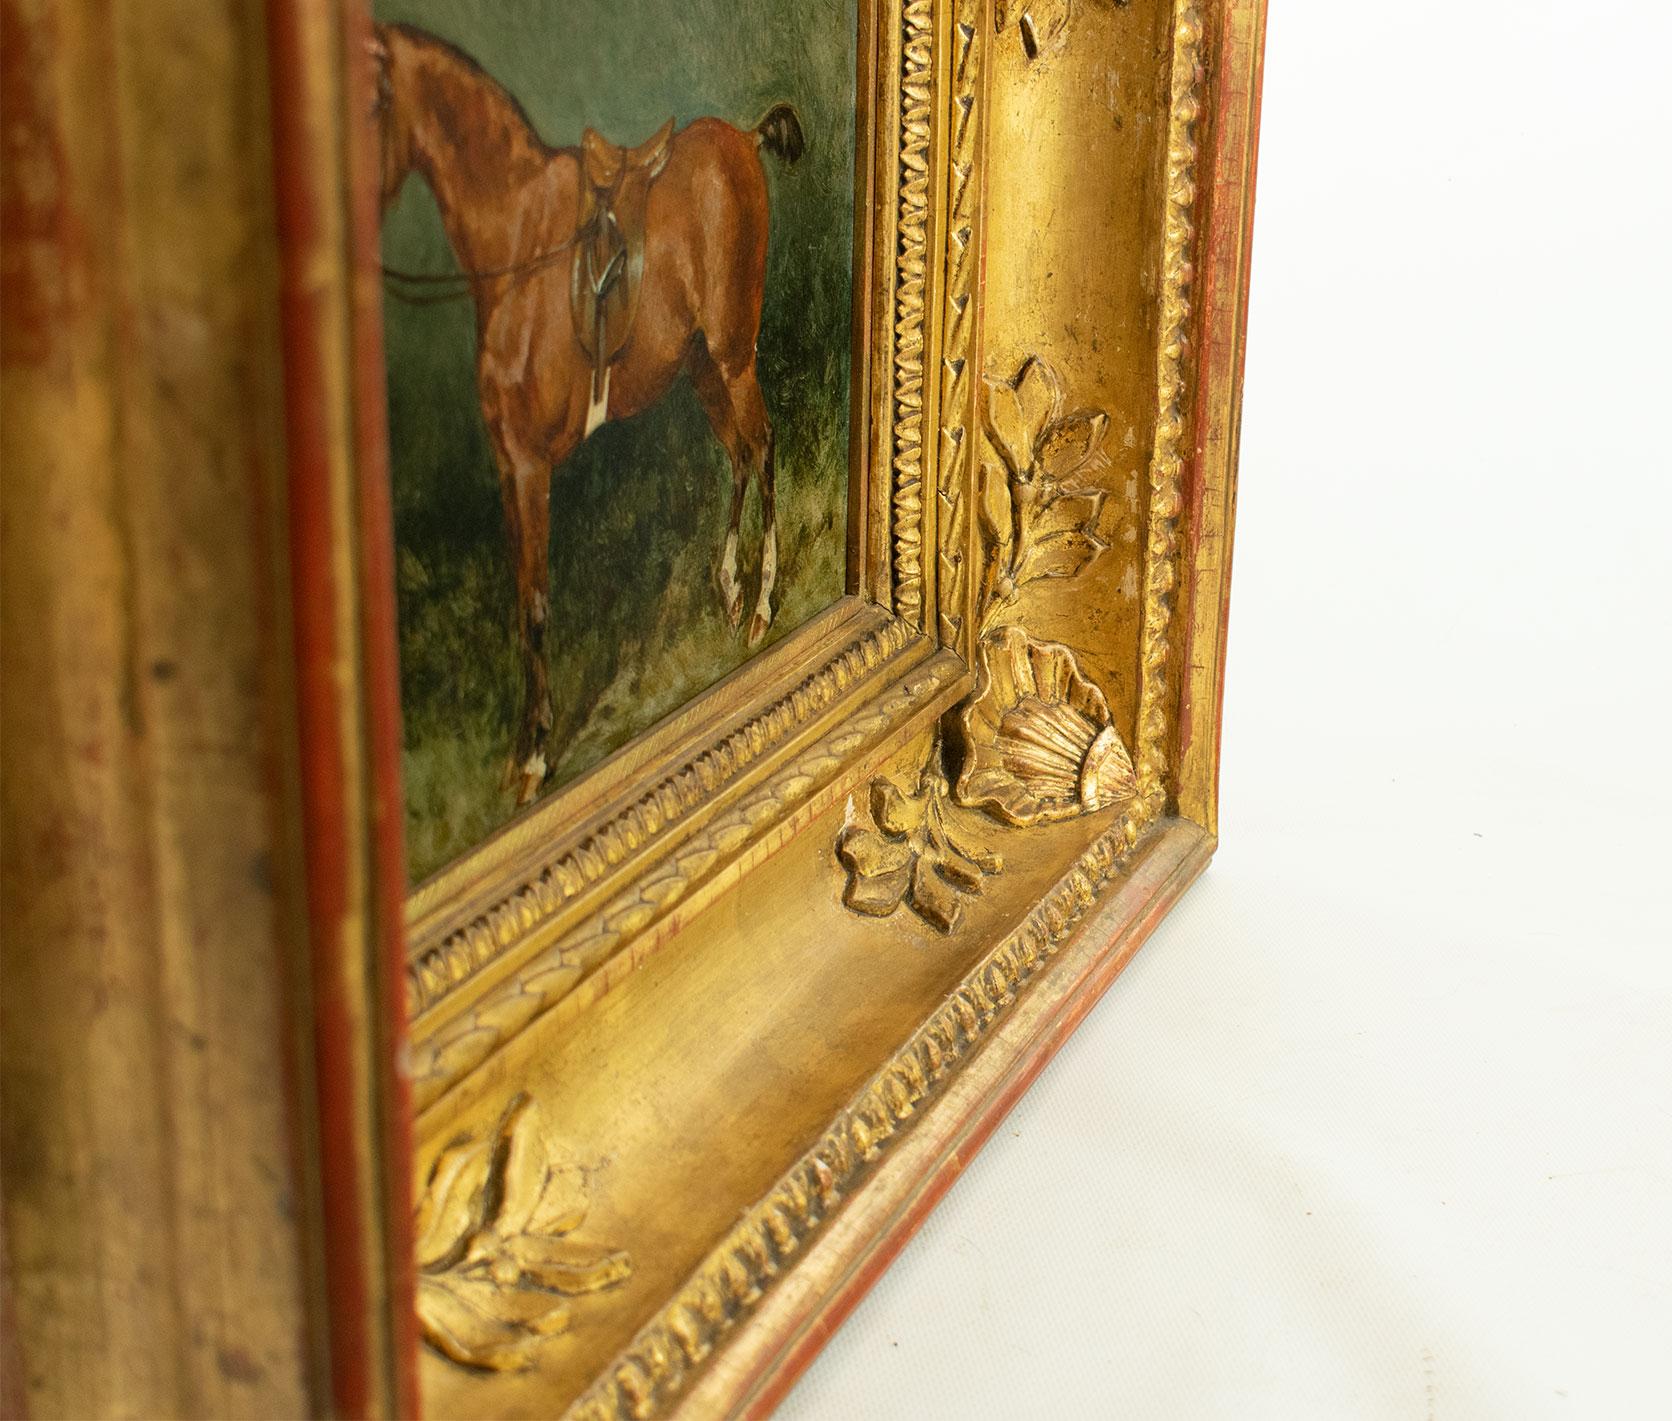 Hand-Painted French School Late 19th century, The Bay Riding Horse, oil on panel